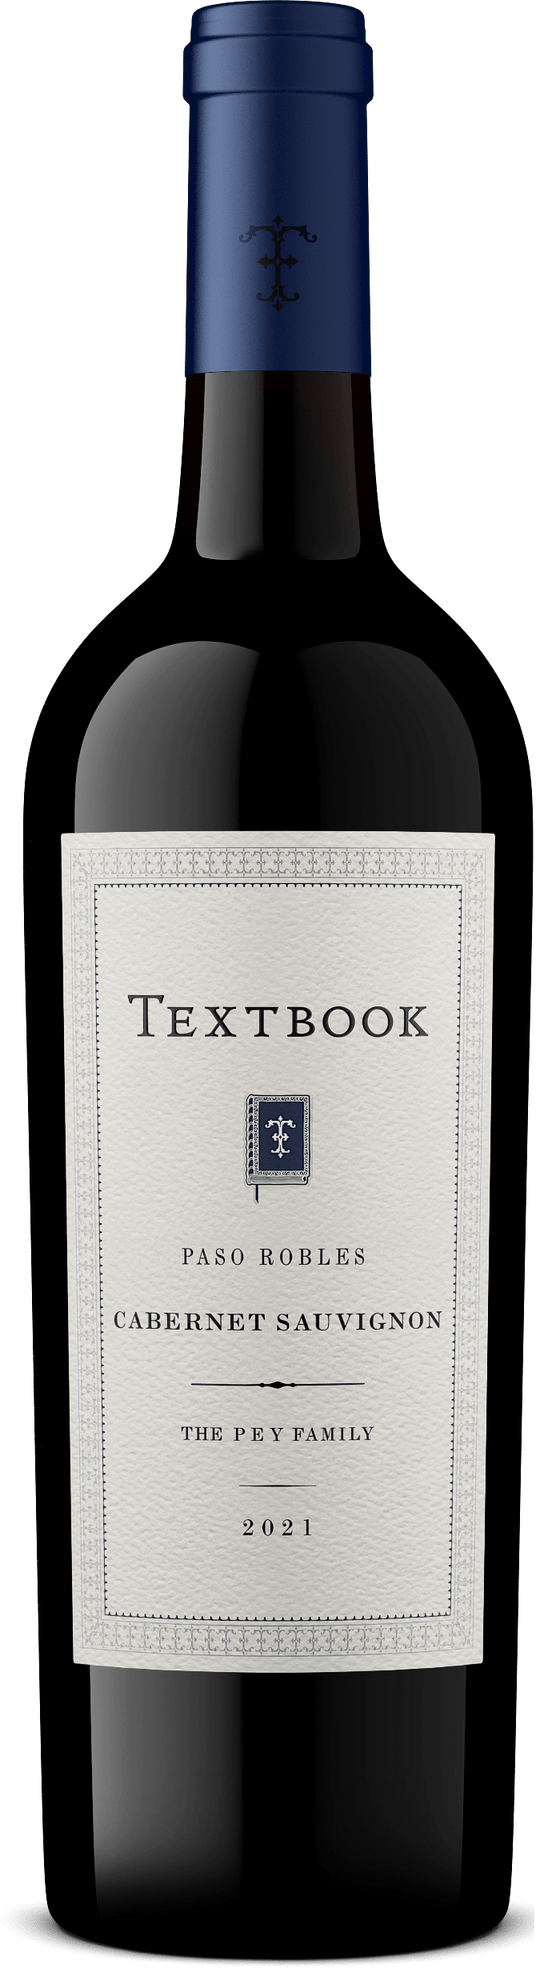 Grassroots Wine Paso Robles Textbook Cabernet